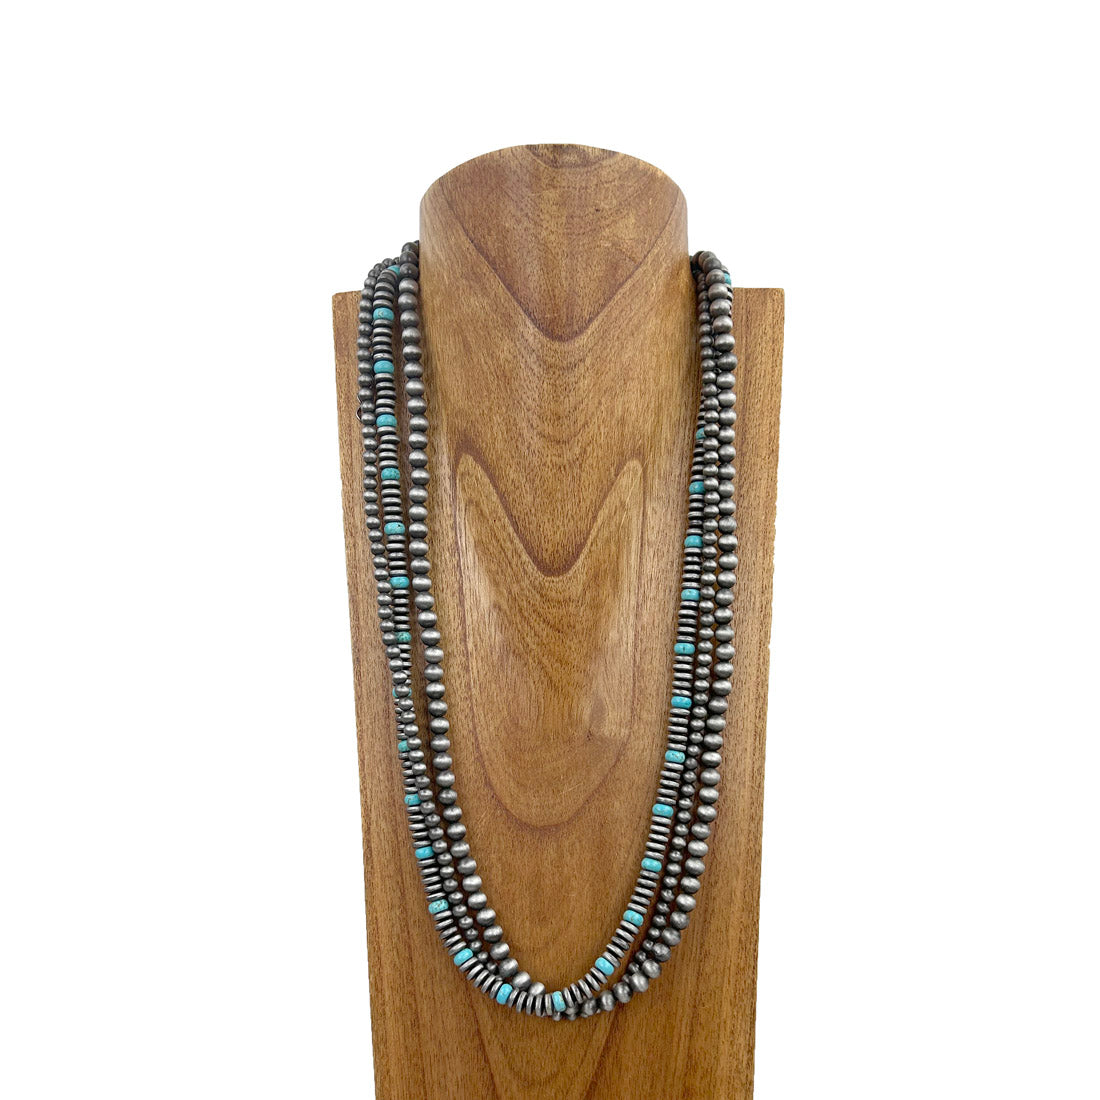 NKS230812-02        31 inches silver Navajo pearl with blue turquoise stone beads Necklace